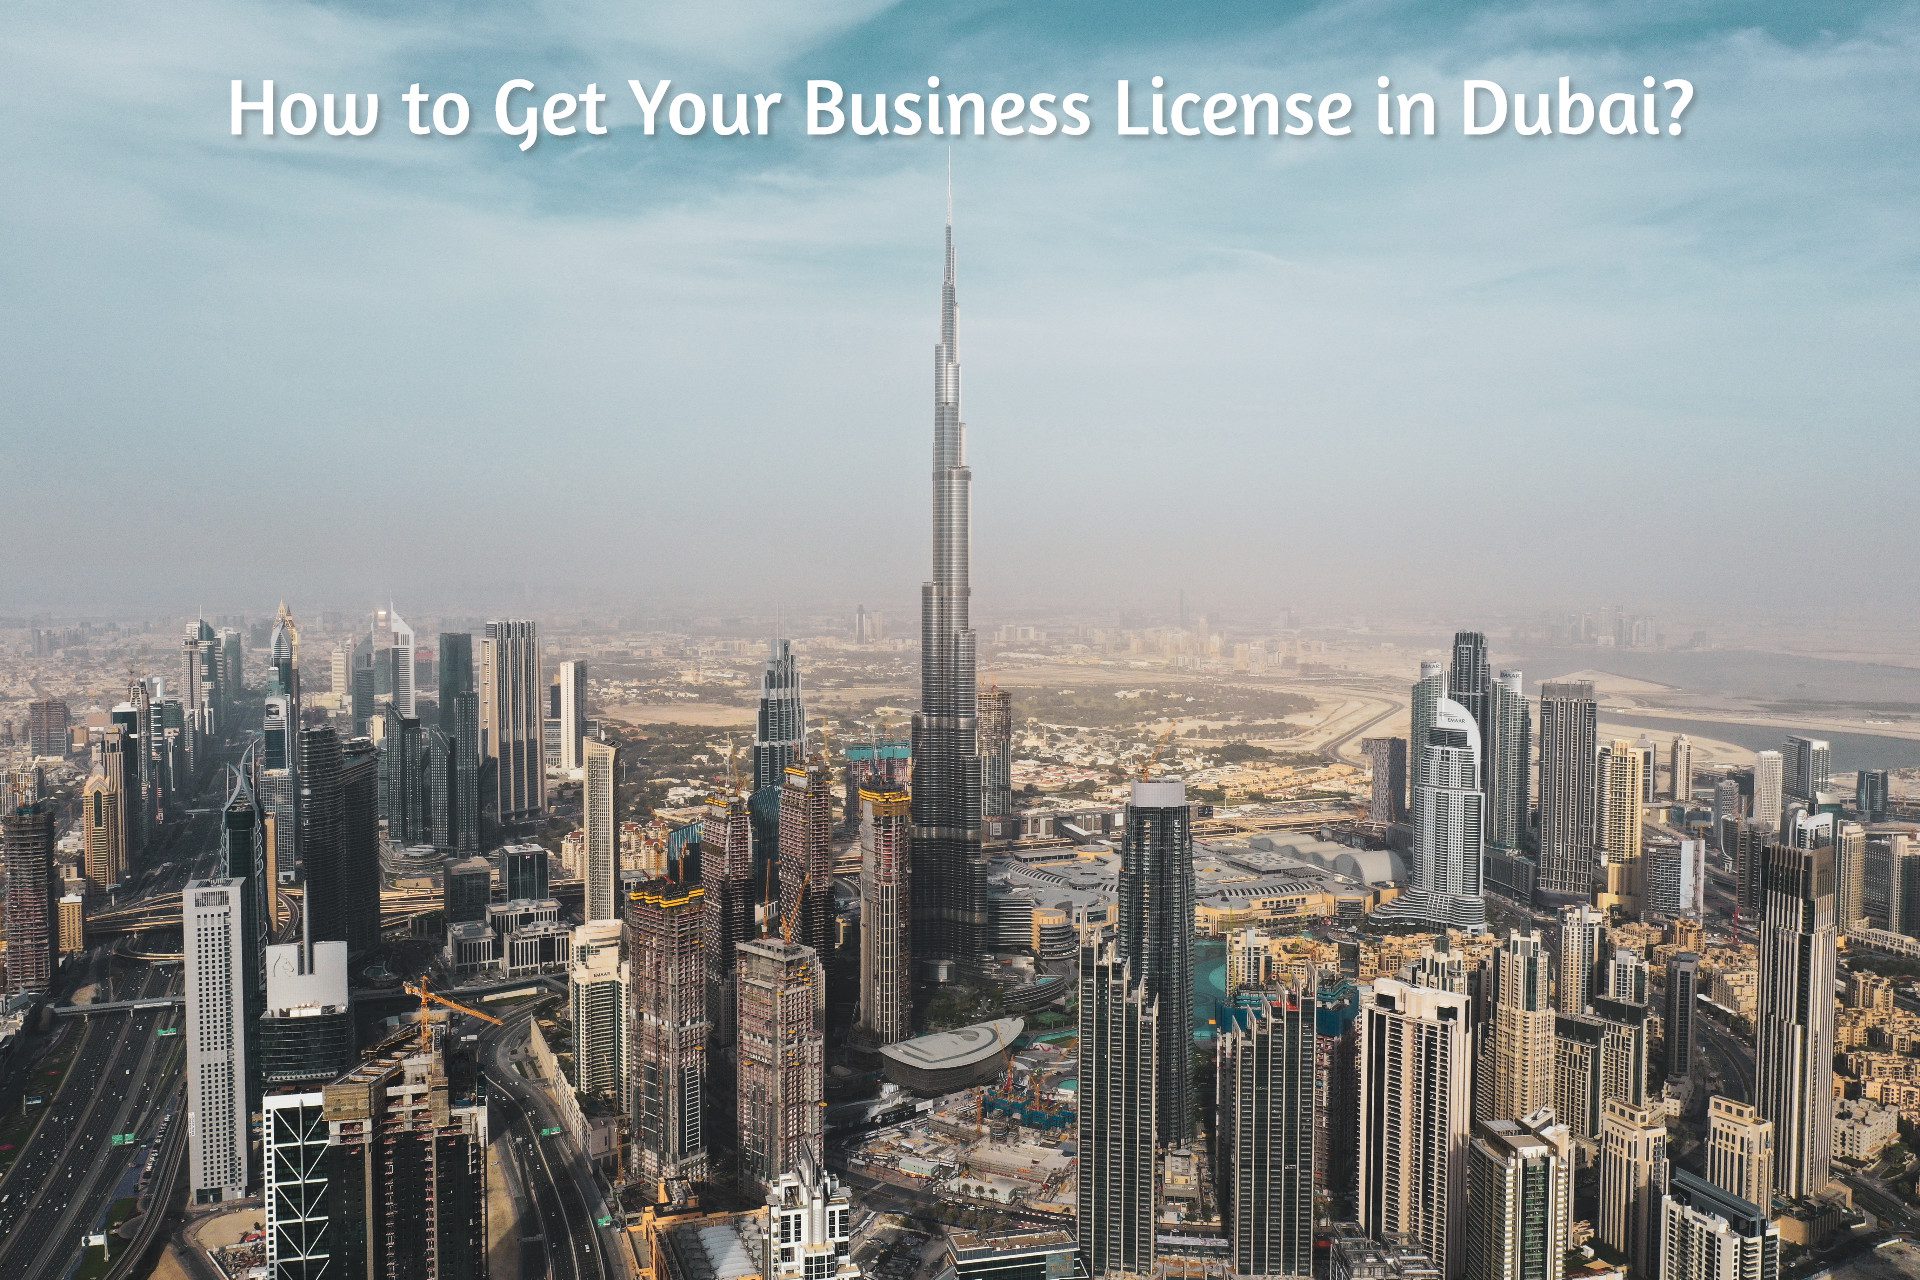 HOW TO GET YOUR BUSINESS LICENSE IN DUBAI